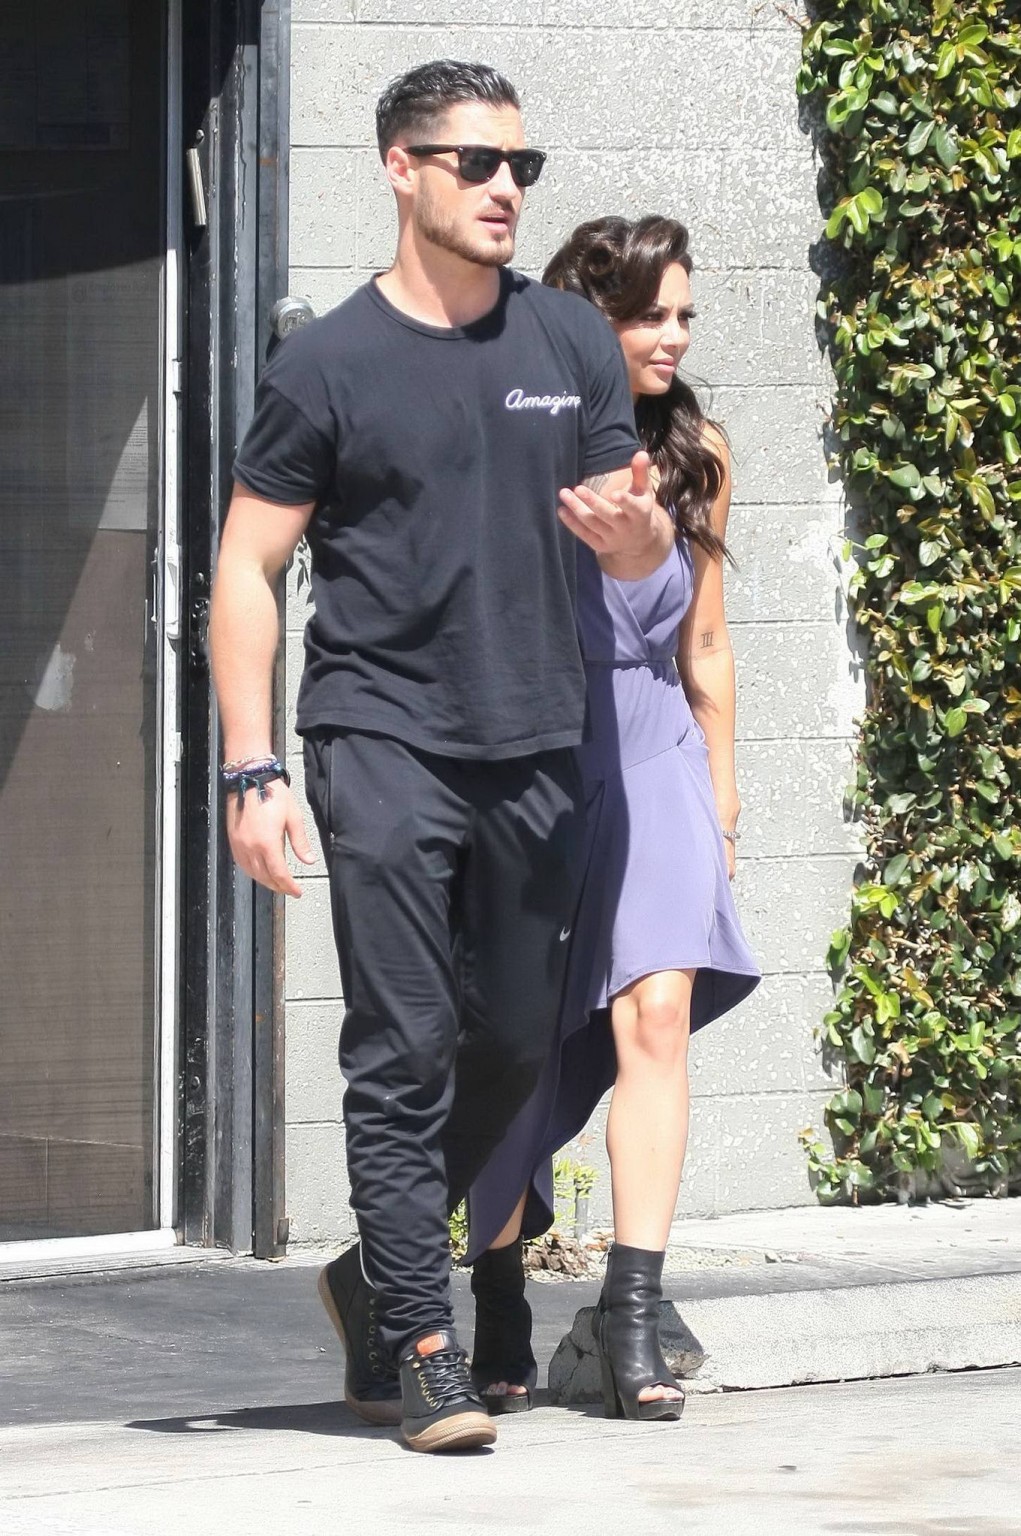 Janel Parrish cleavy and leggy in a short purple dress leaving DWTS Rehearsal in #75185796